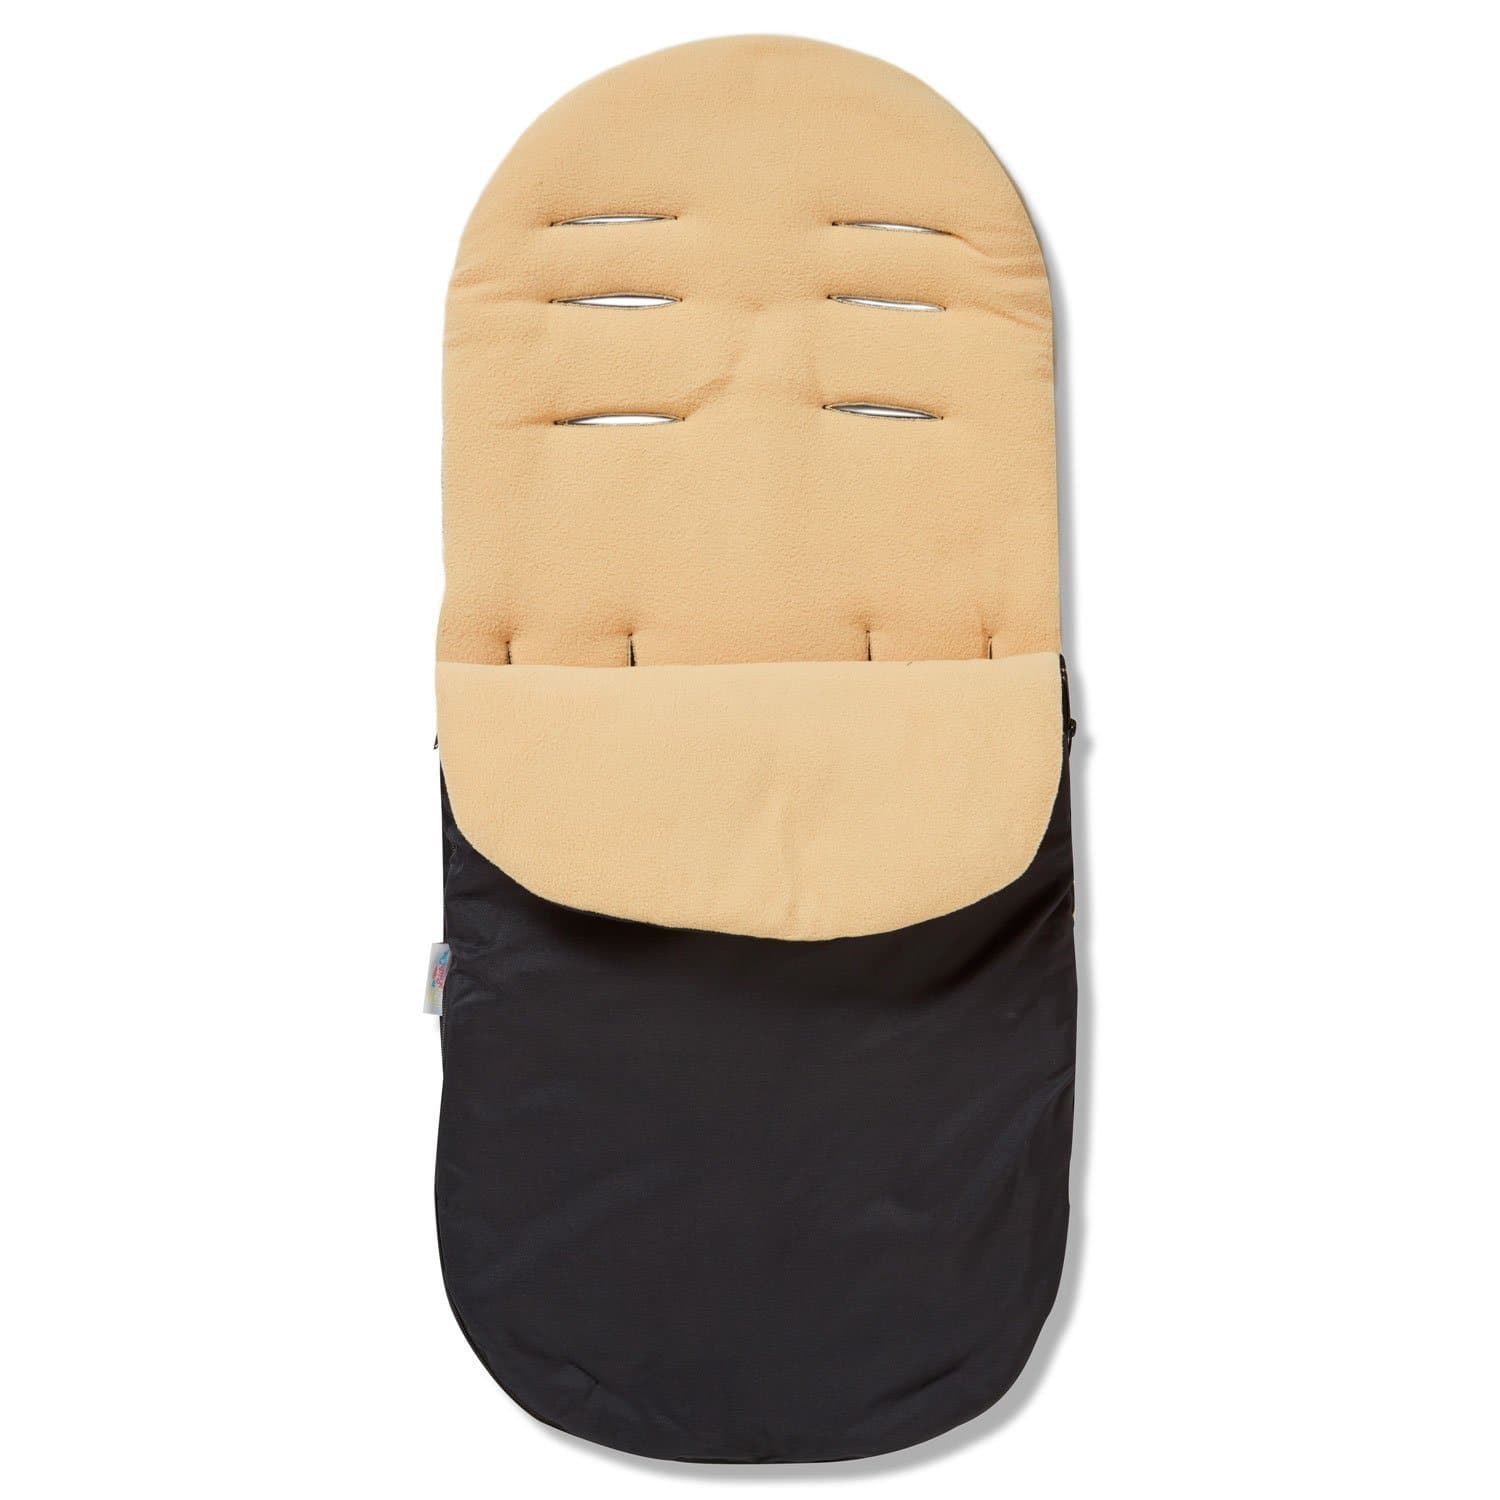 Footmuff / Cosy Toes Compatible with Maxi Cosi - For Your Little One